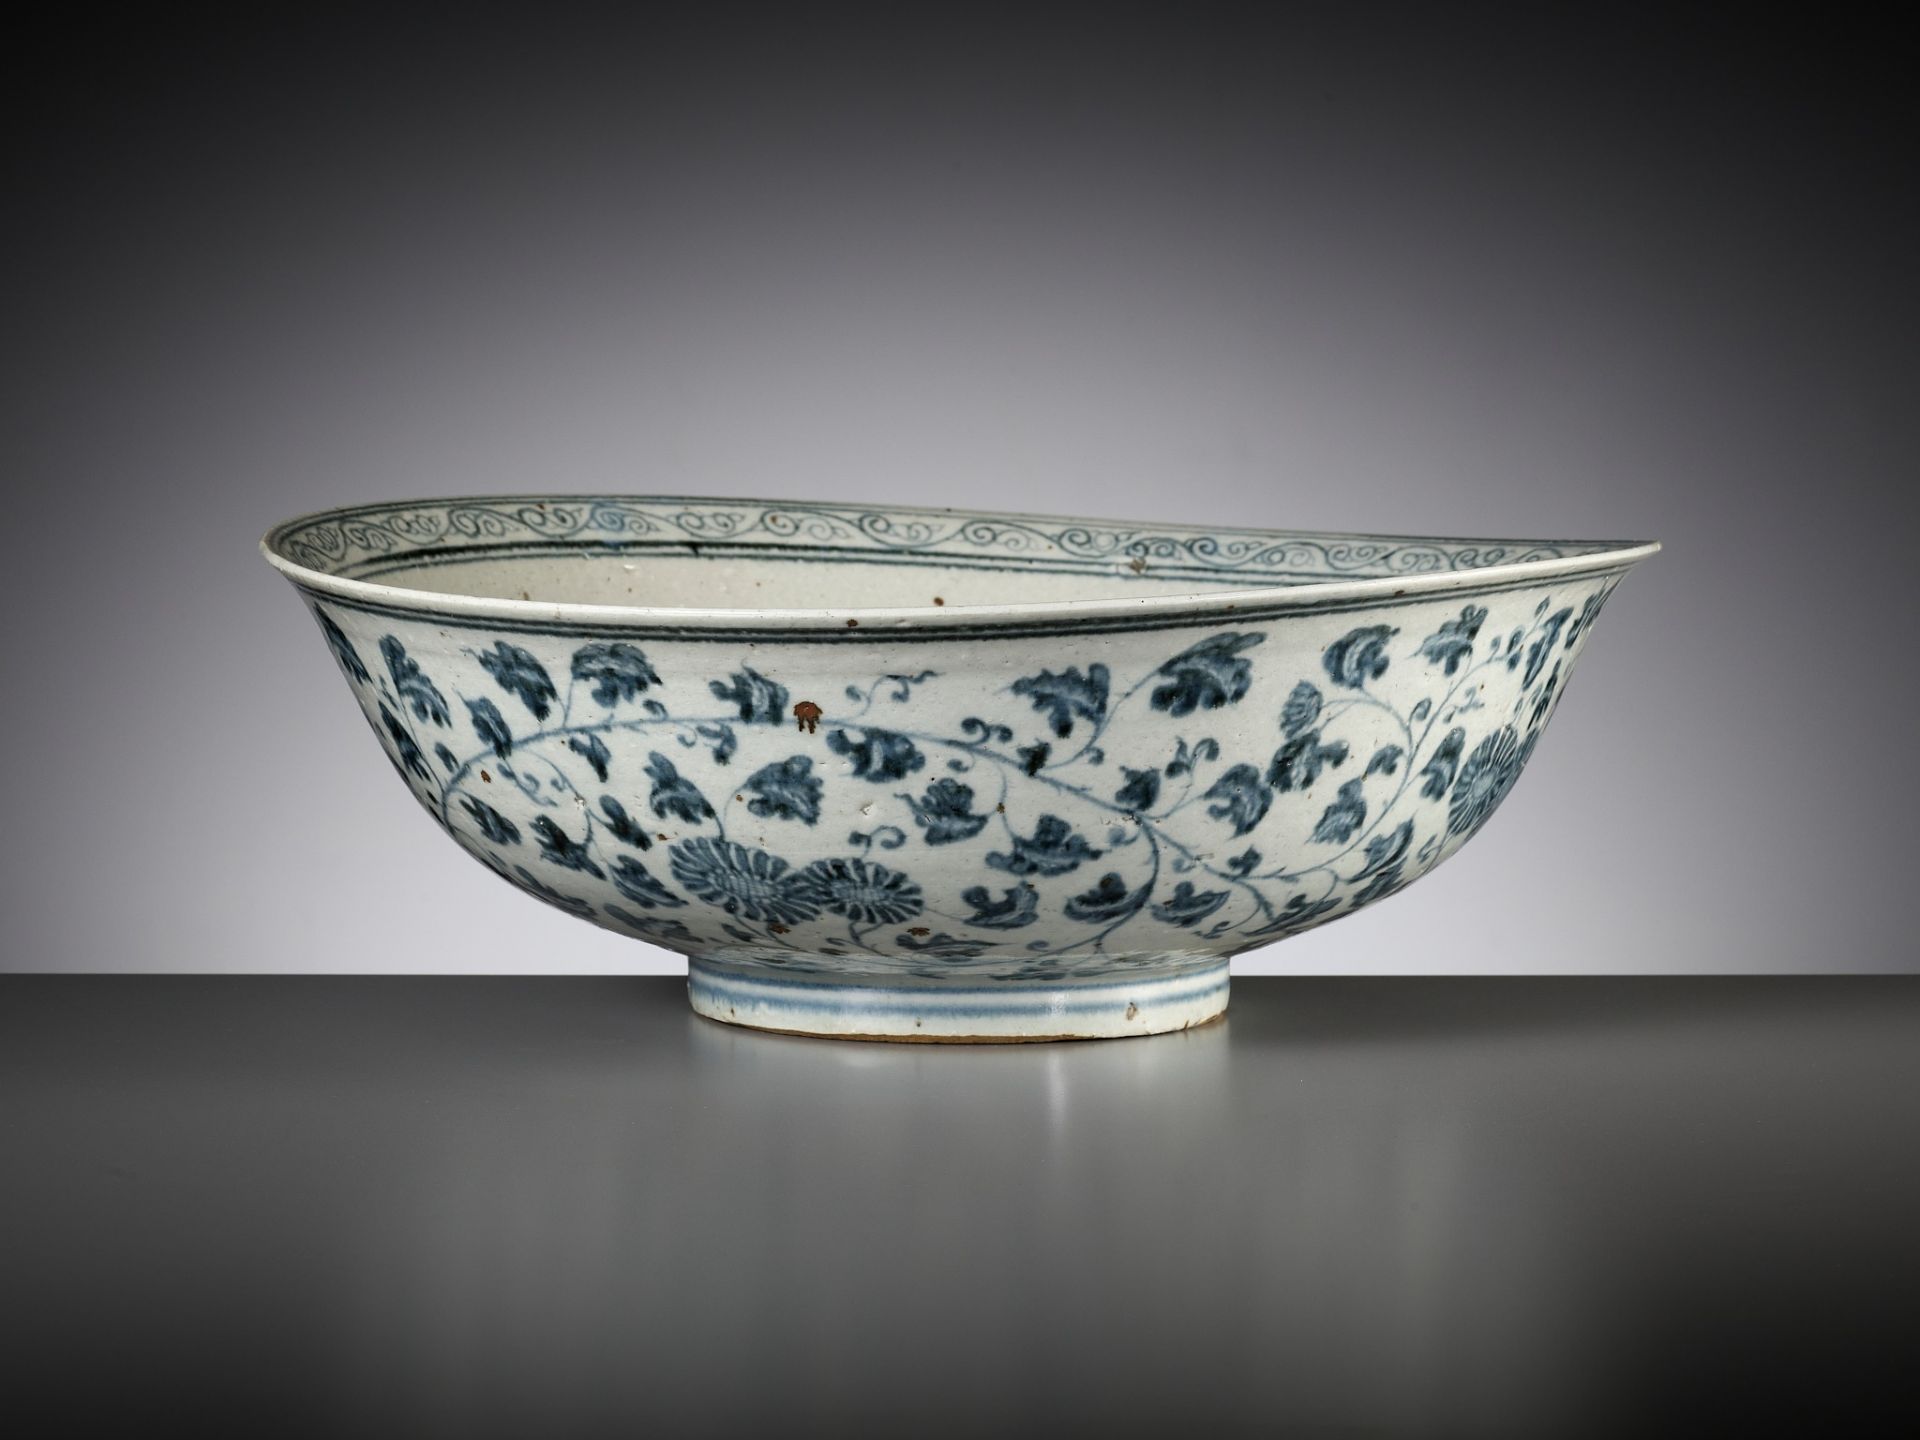 A LARGE ANNAMESE BLUE AND WHITE BOWL, VIETNAM, 14TH-15TH CENTURY - Image 9 of 12